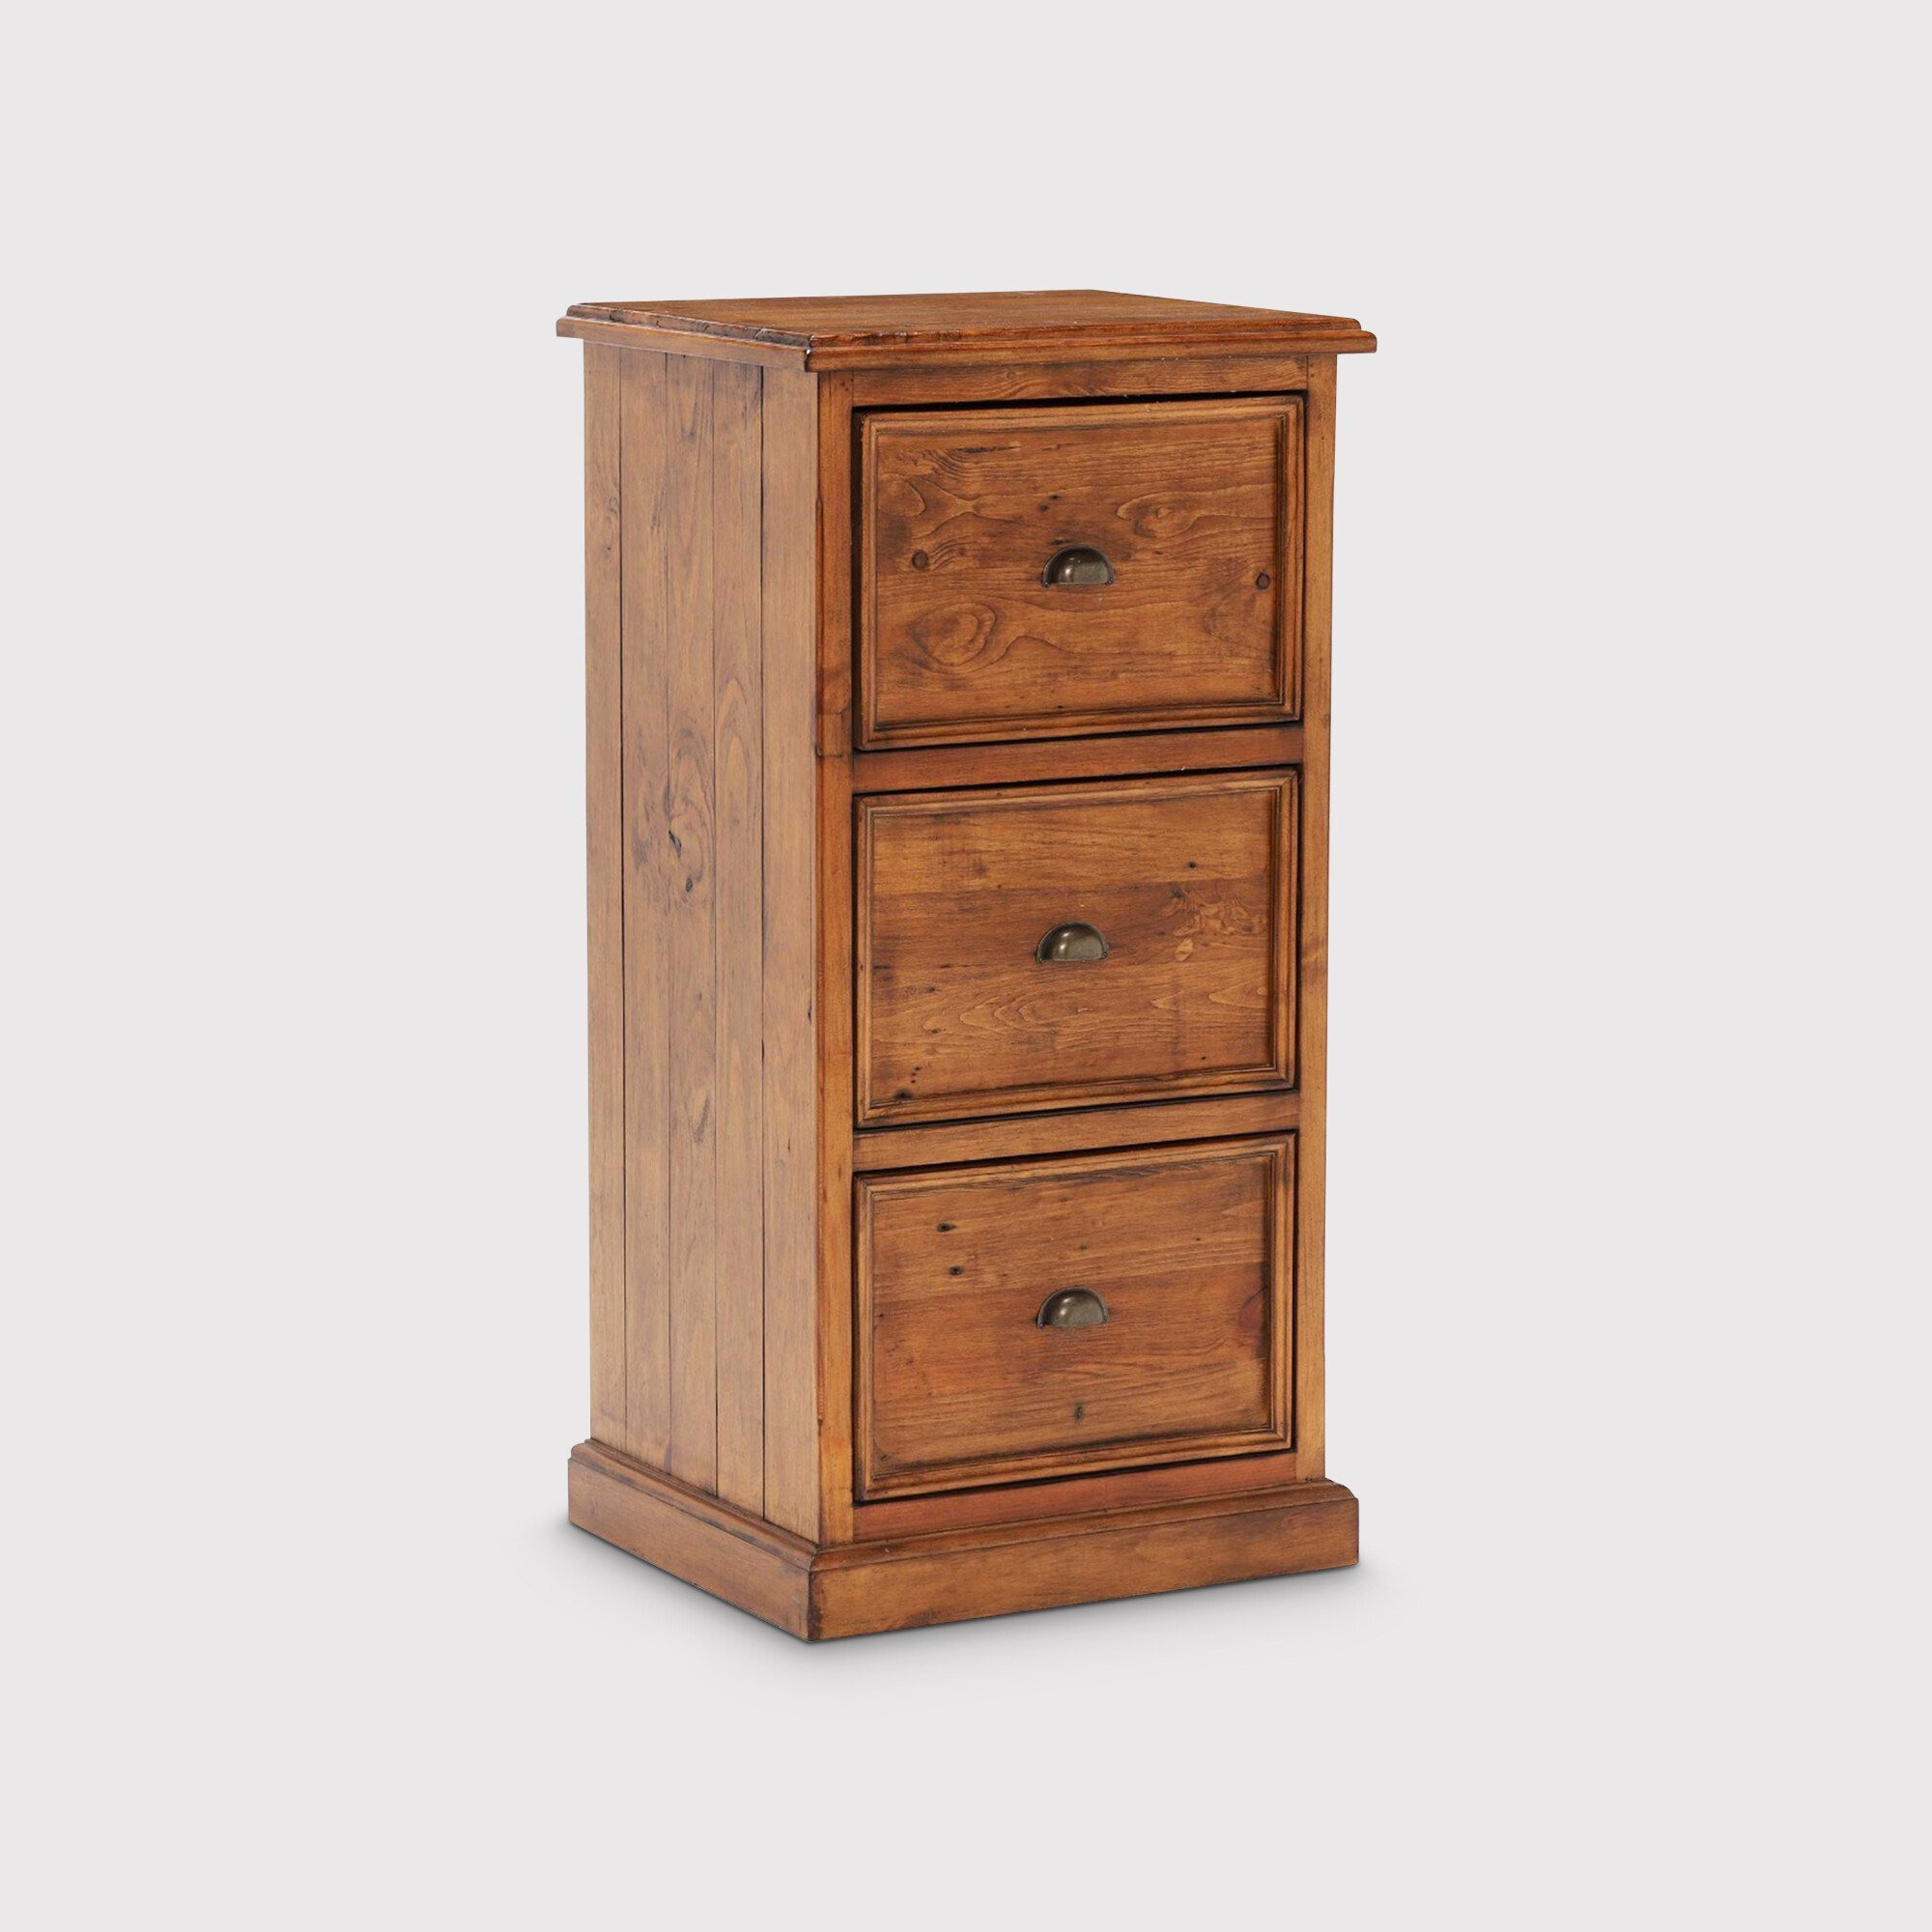 Villiers 3 Drawer Filing Cabinet, Pine Wood - Barker & Stonehouse - image 1